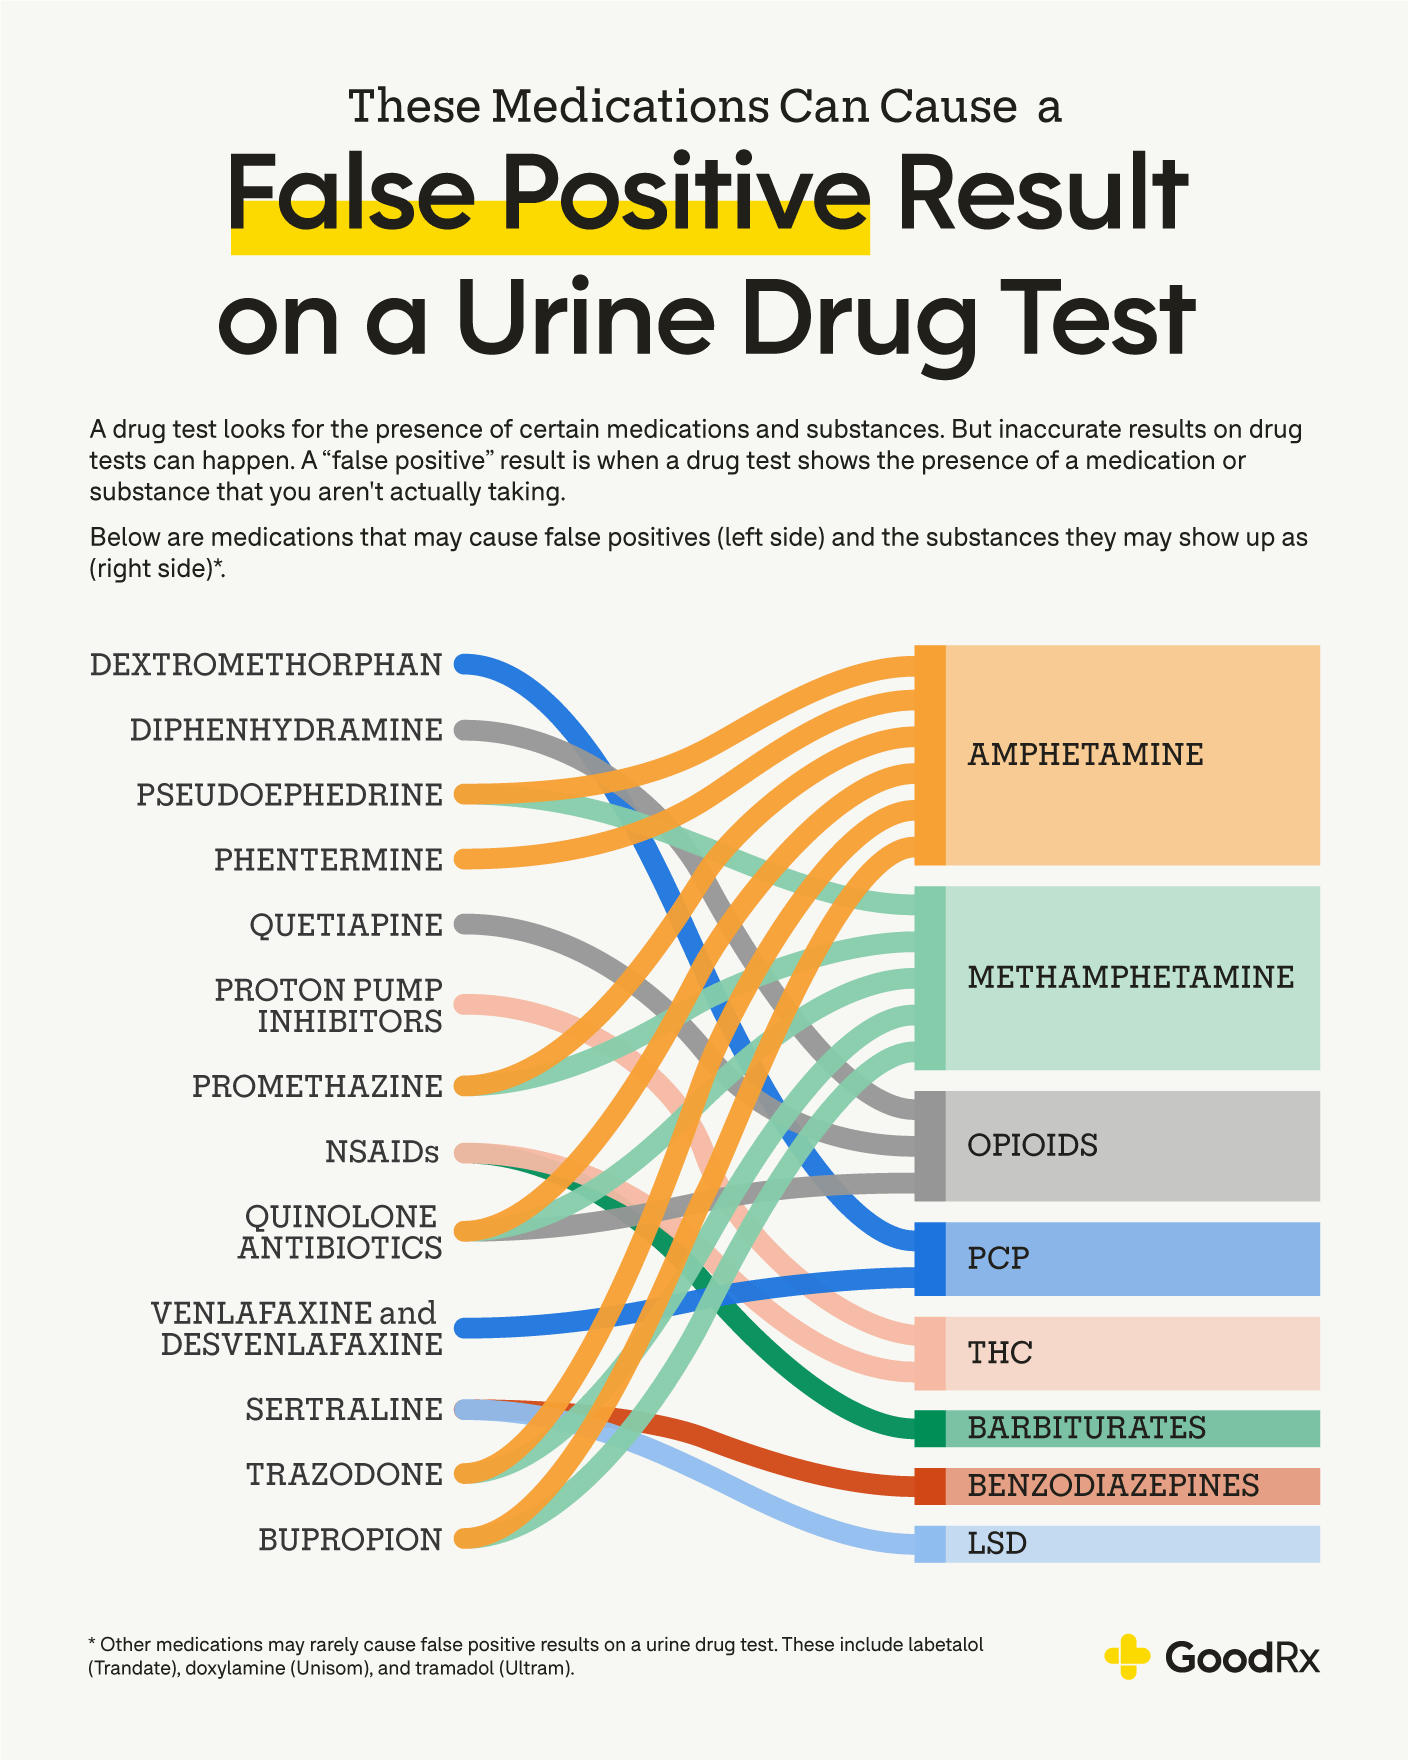 What Does Adderall Show Up as on a Drug Test?